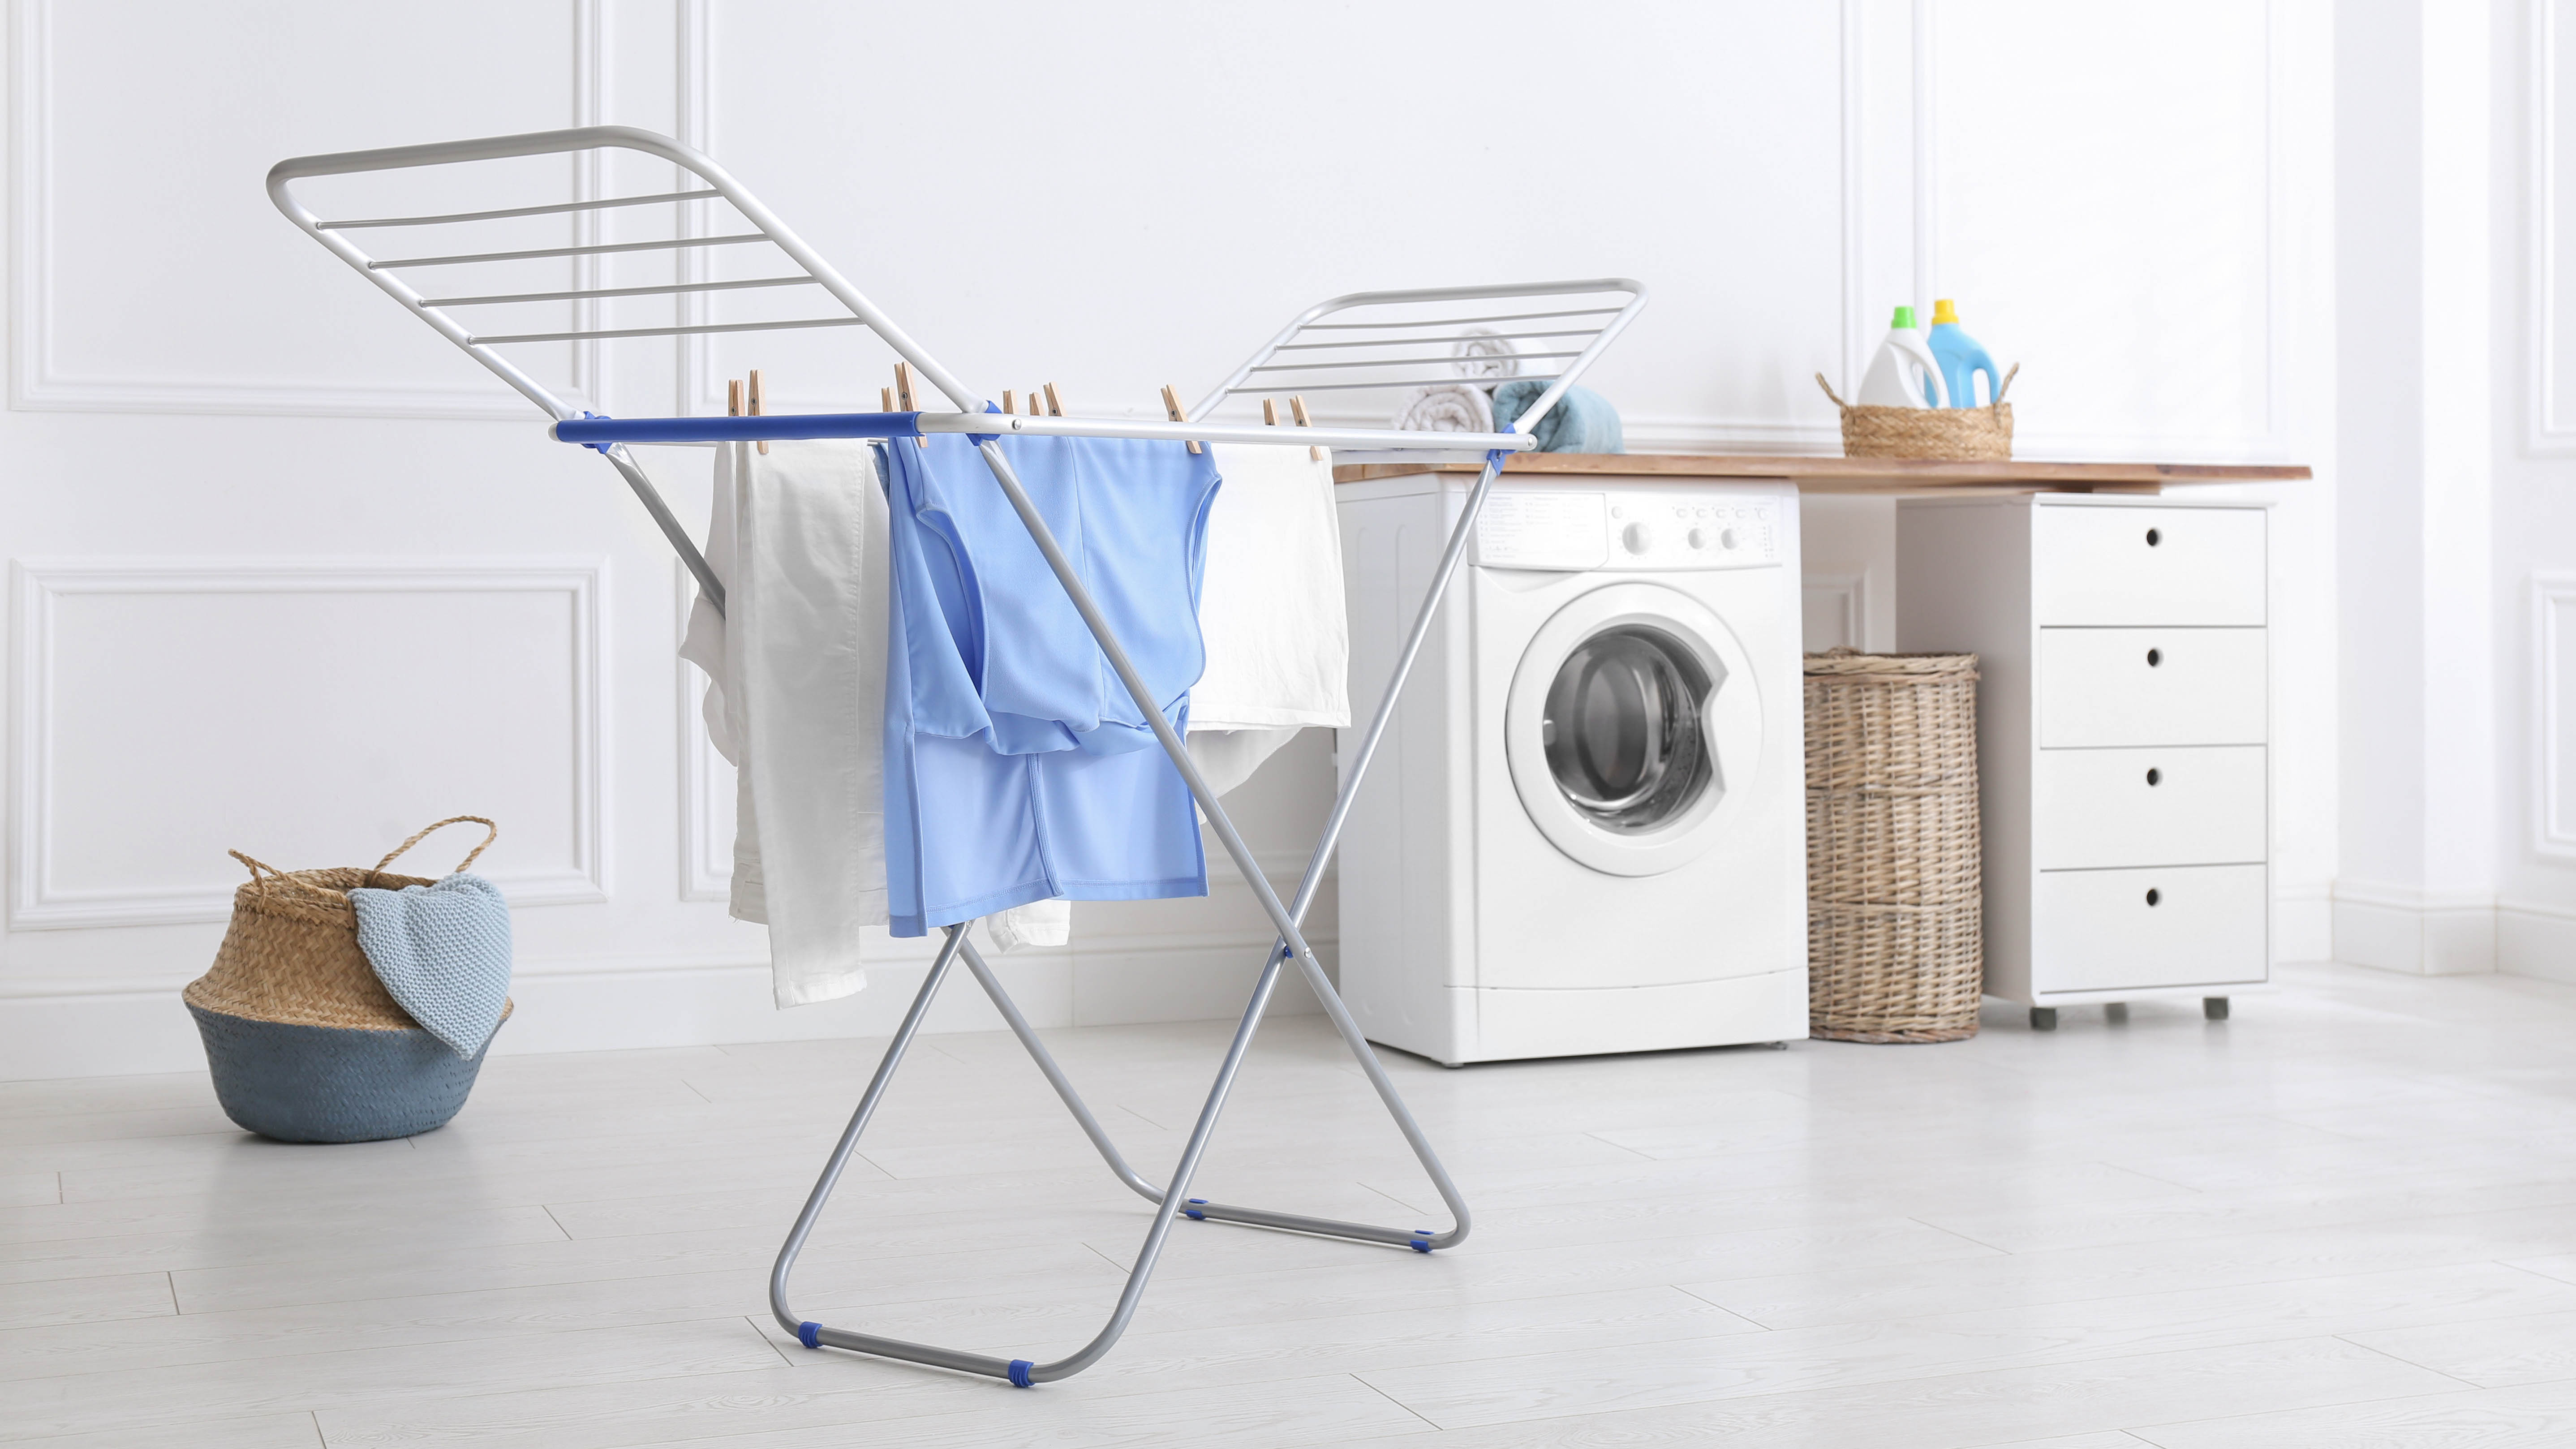 A drying rack drying clothes with a washing machine and laundry basket in the background